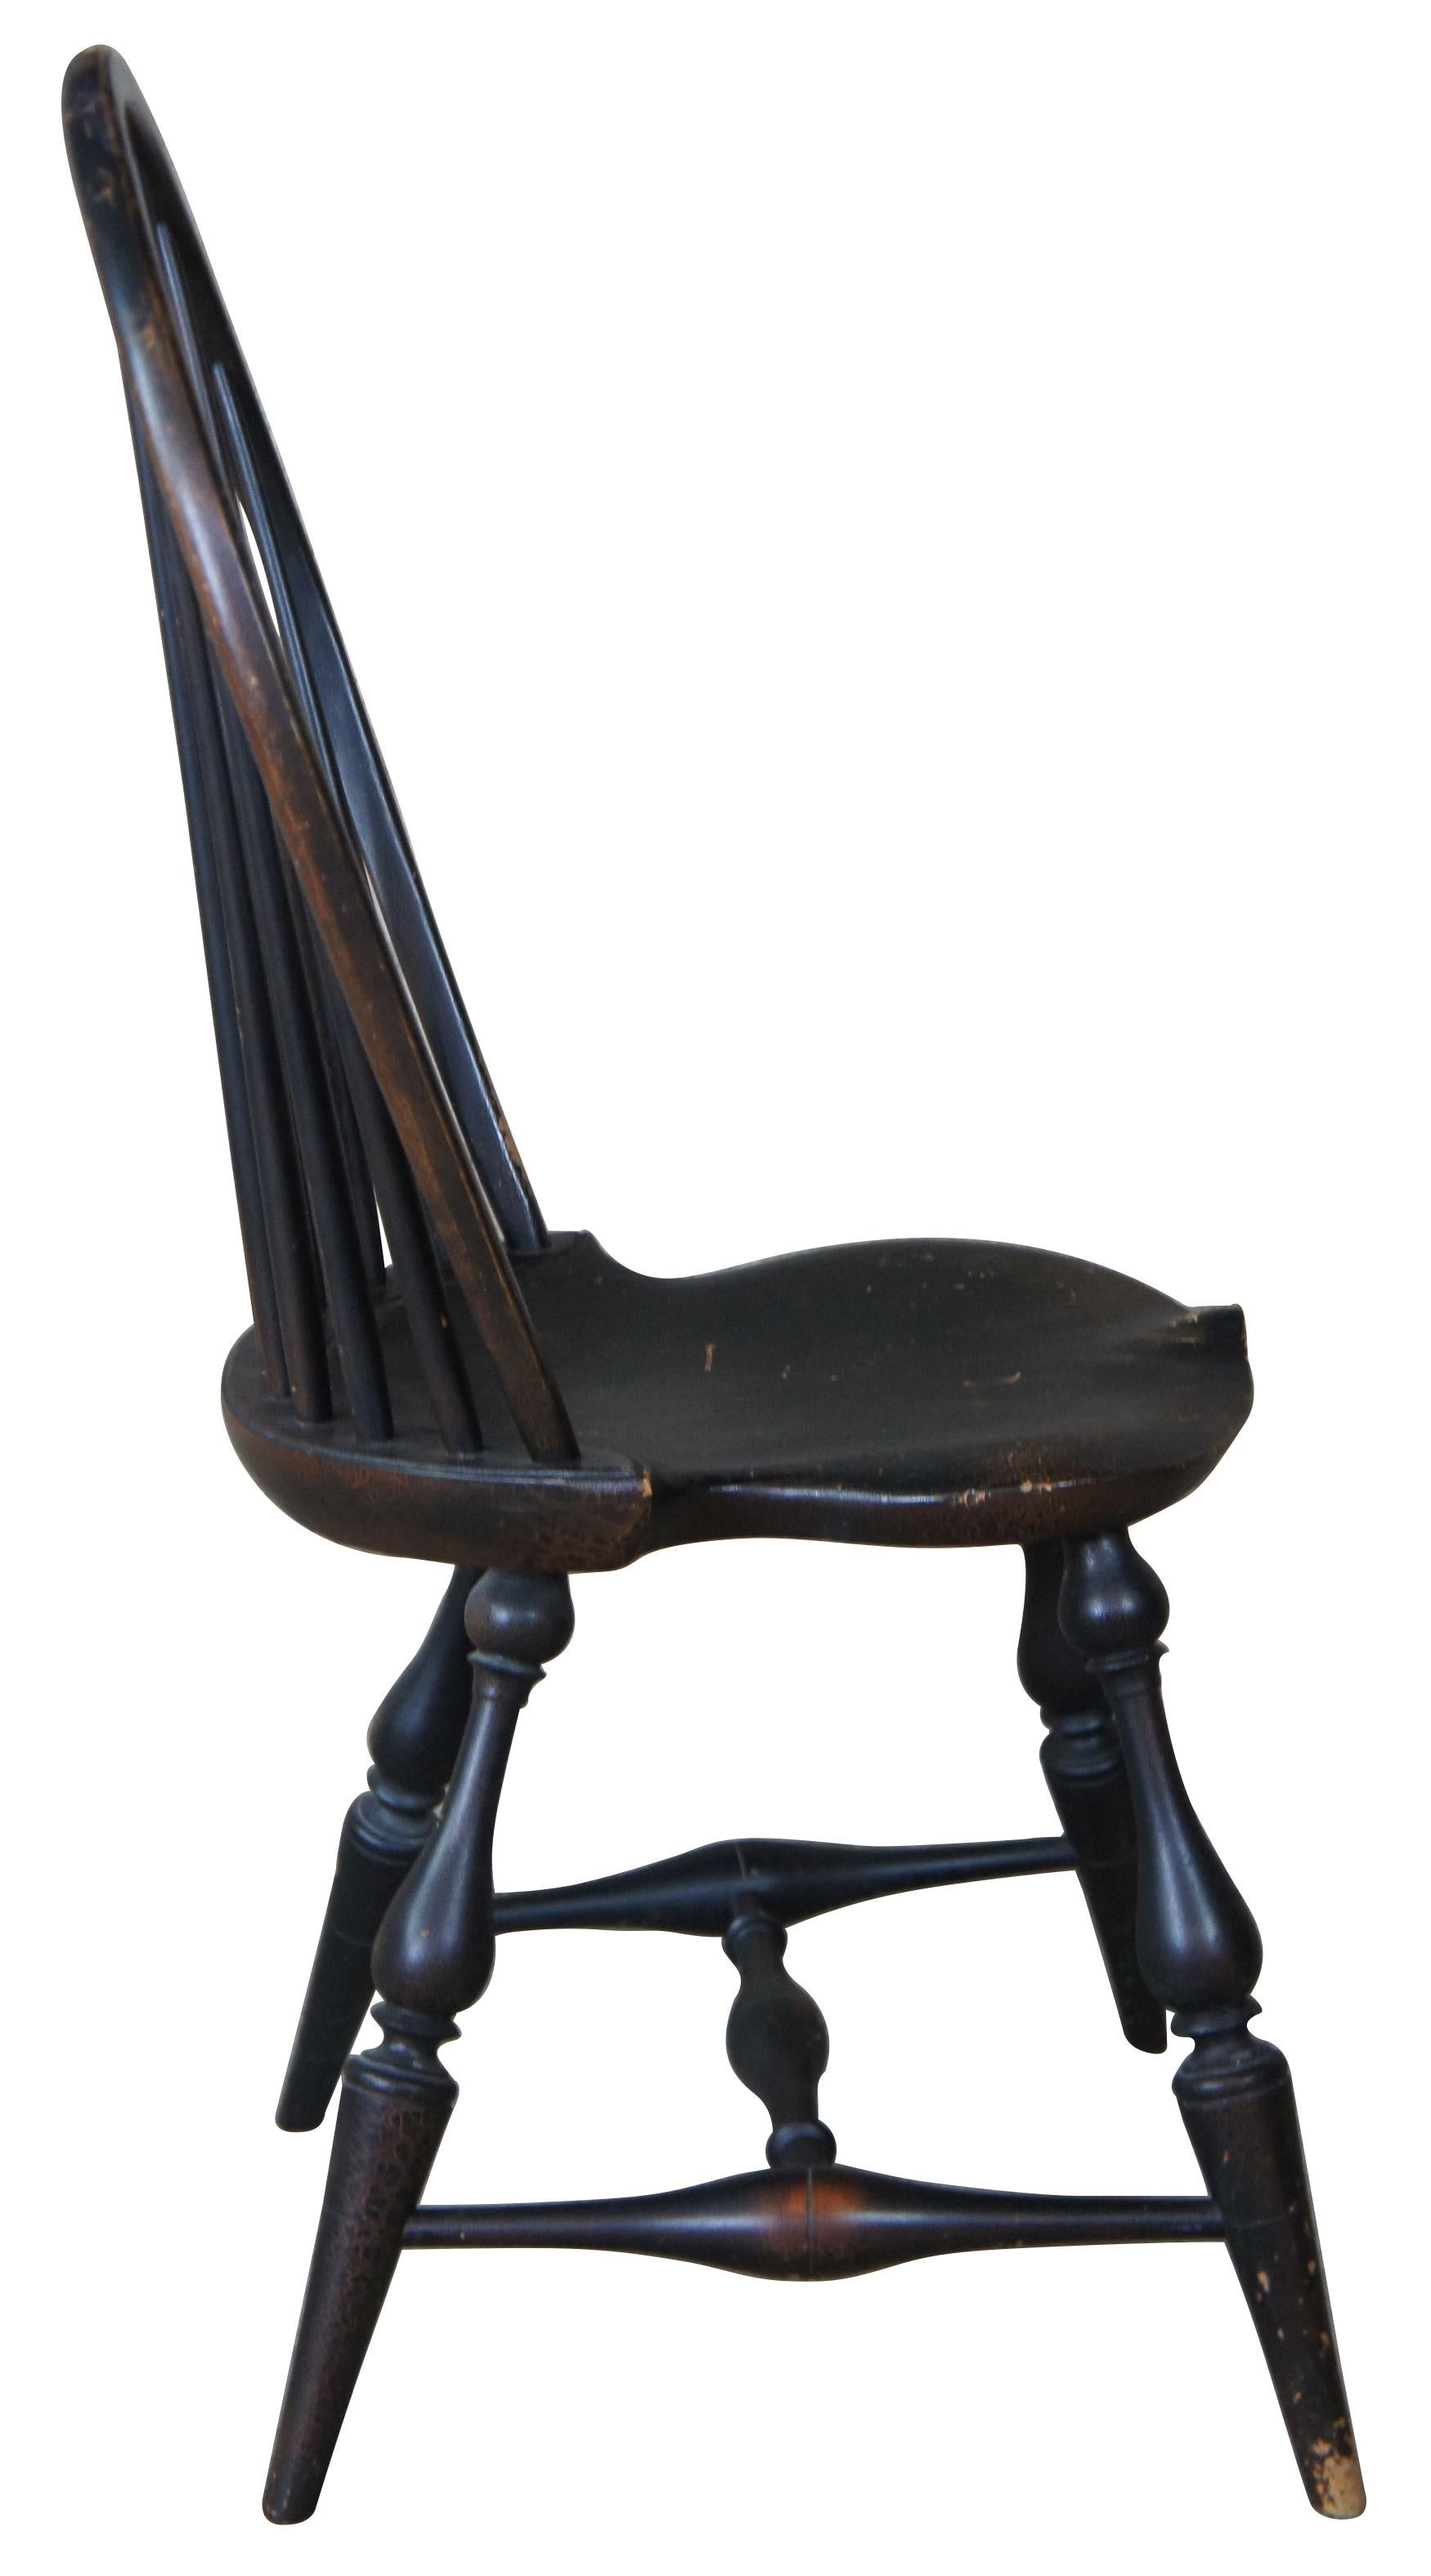 river bend chair company